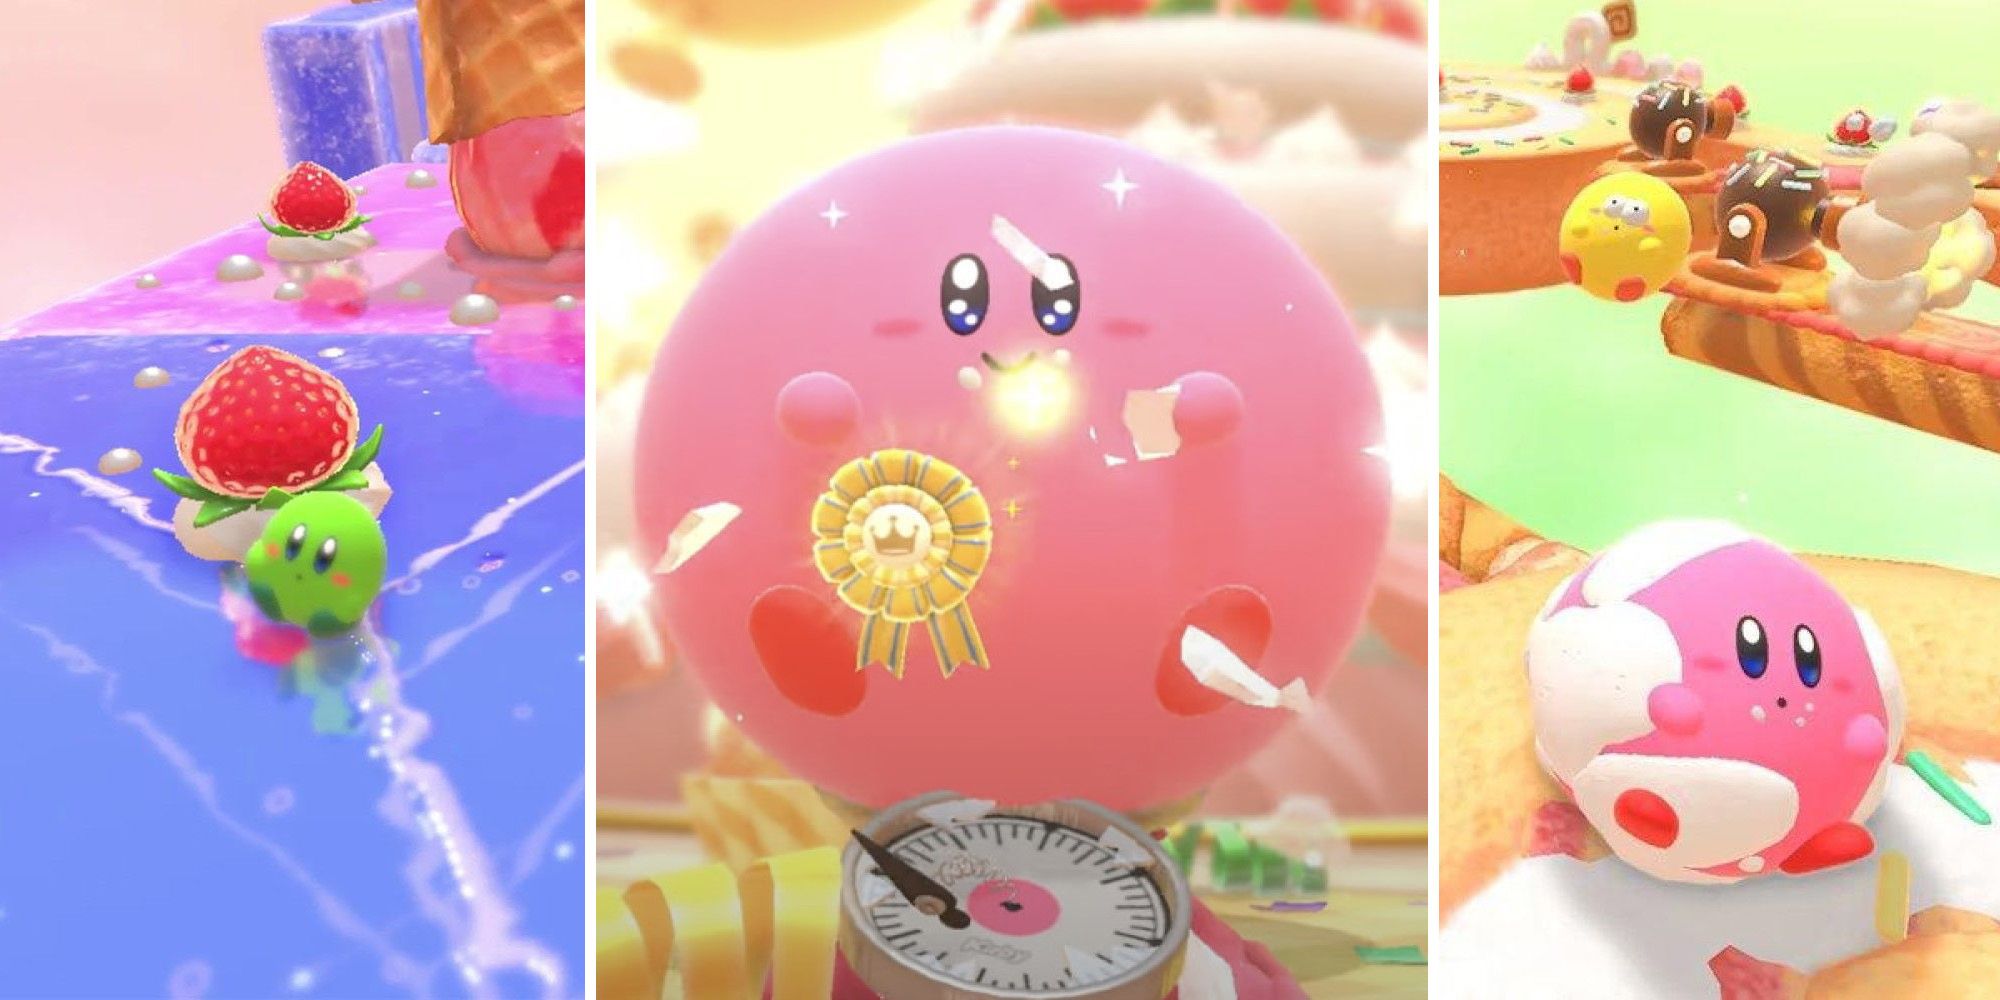 Kirby's Dream Buffet Feature Image